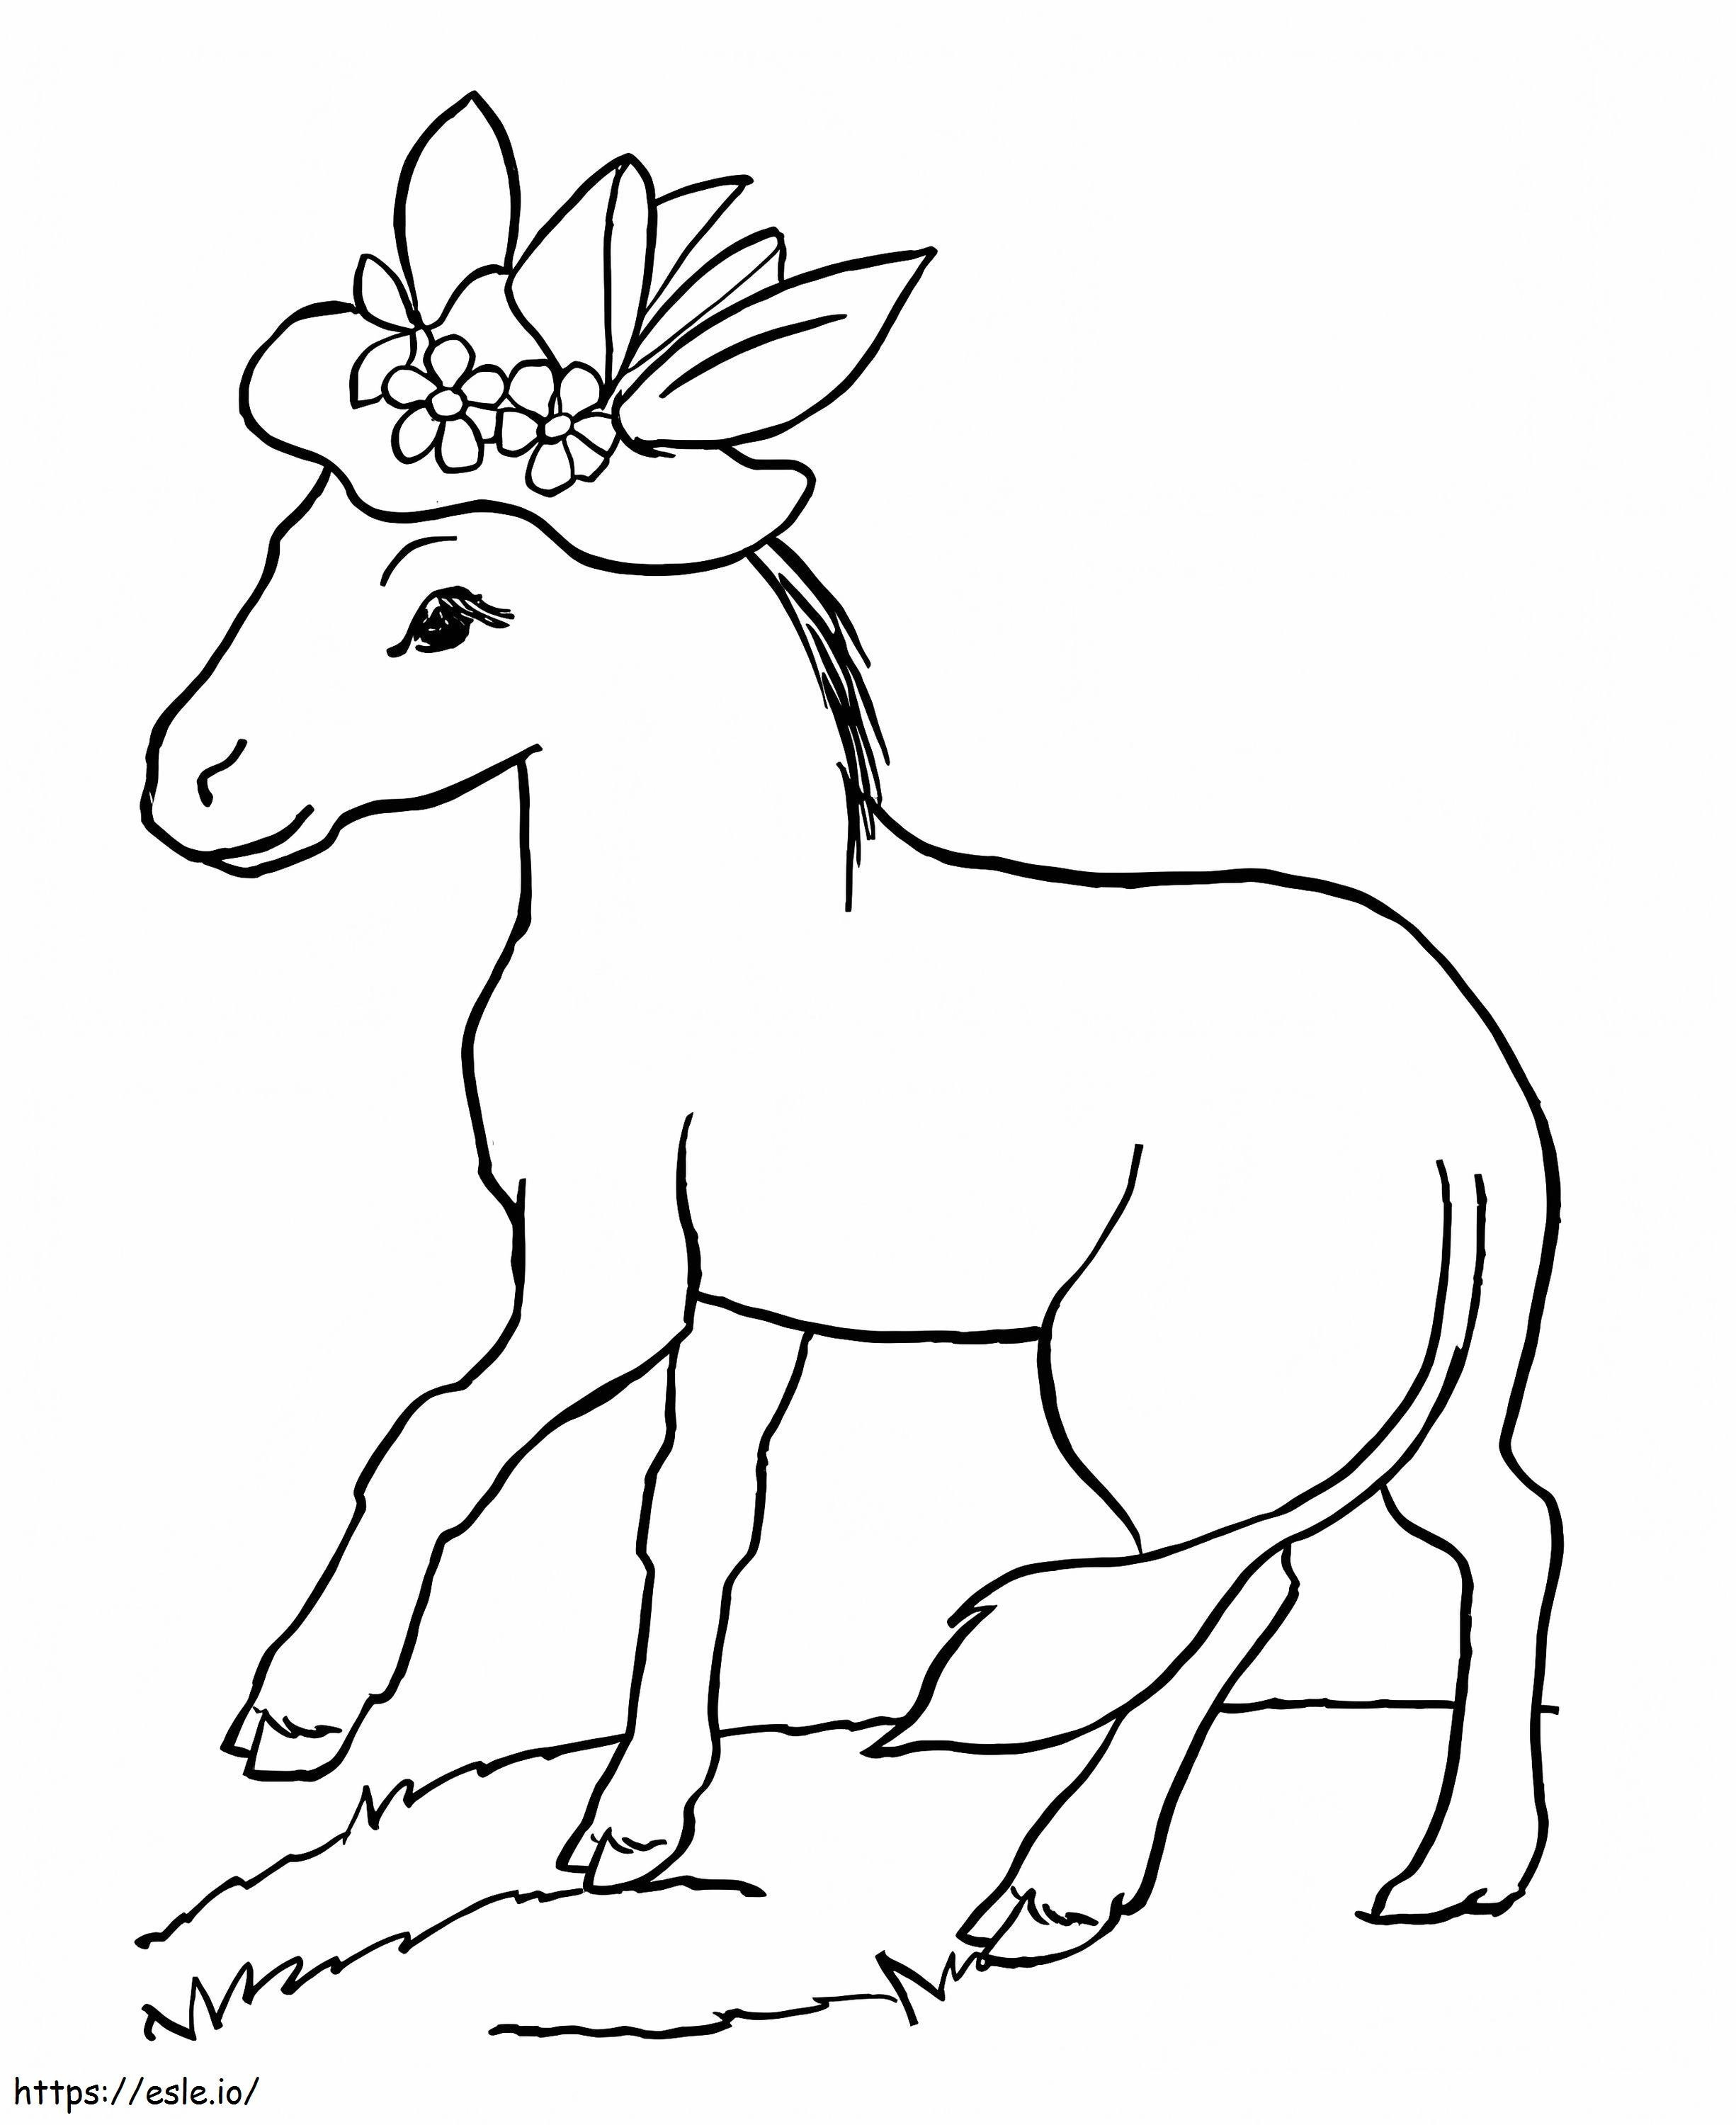 Good Donkey coloring page